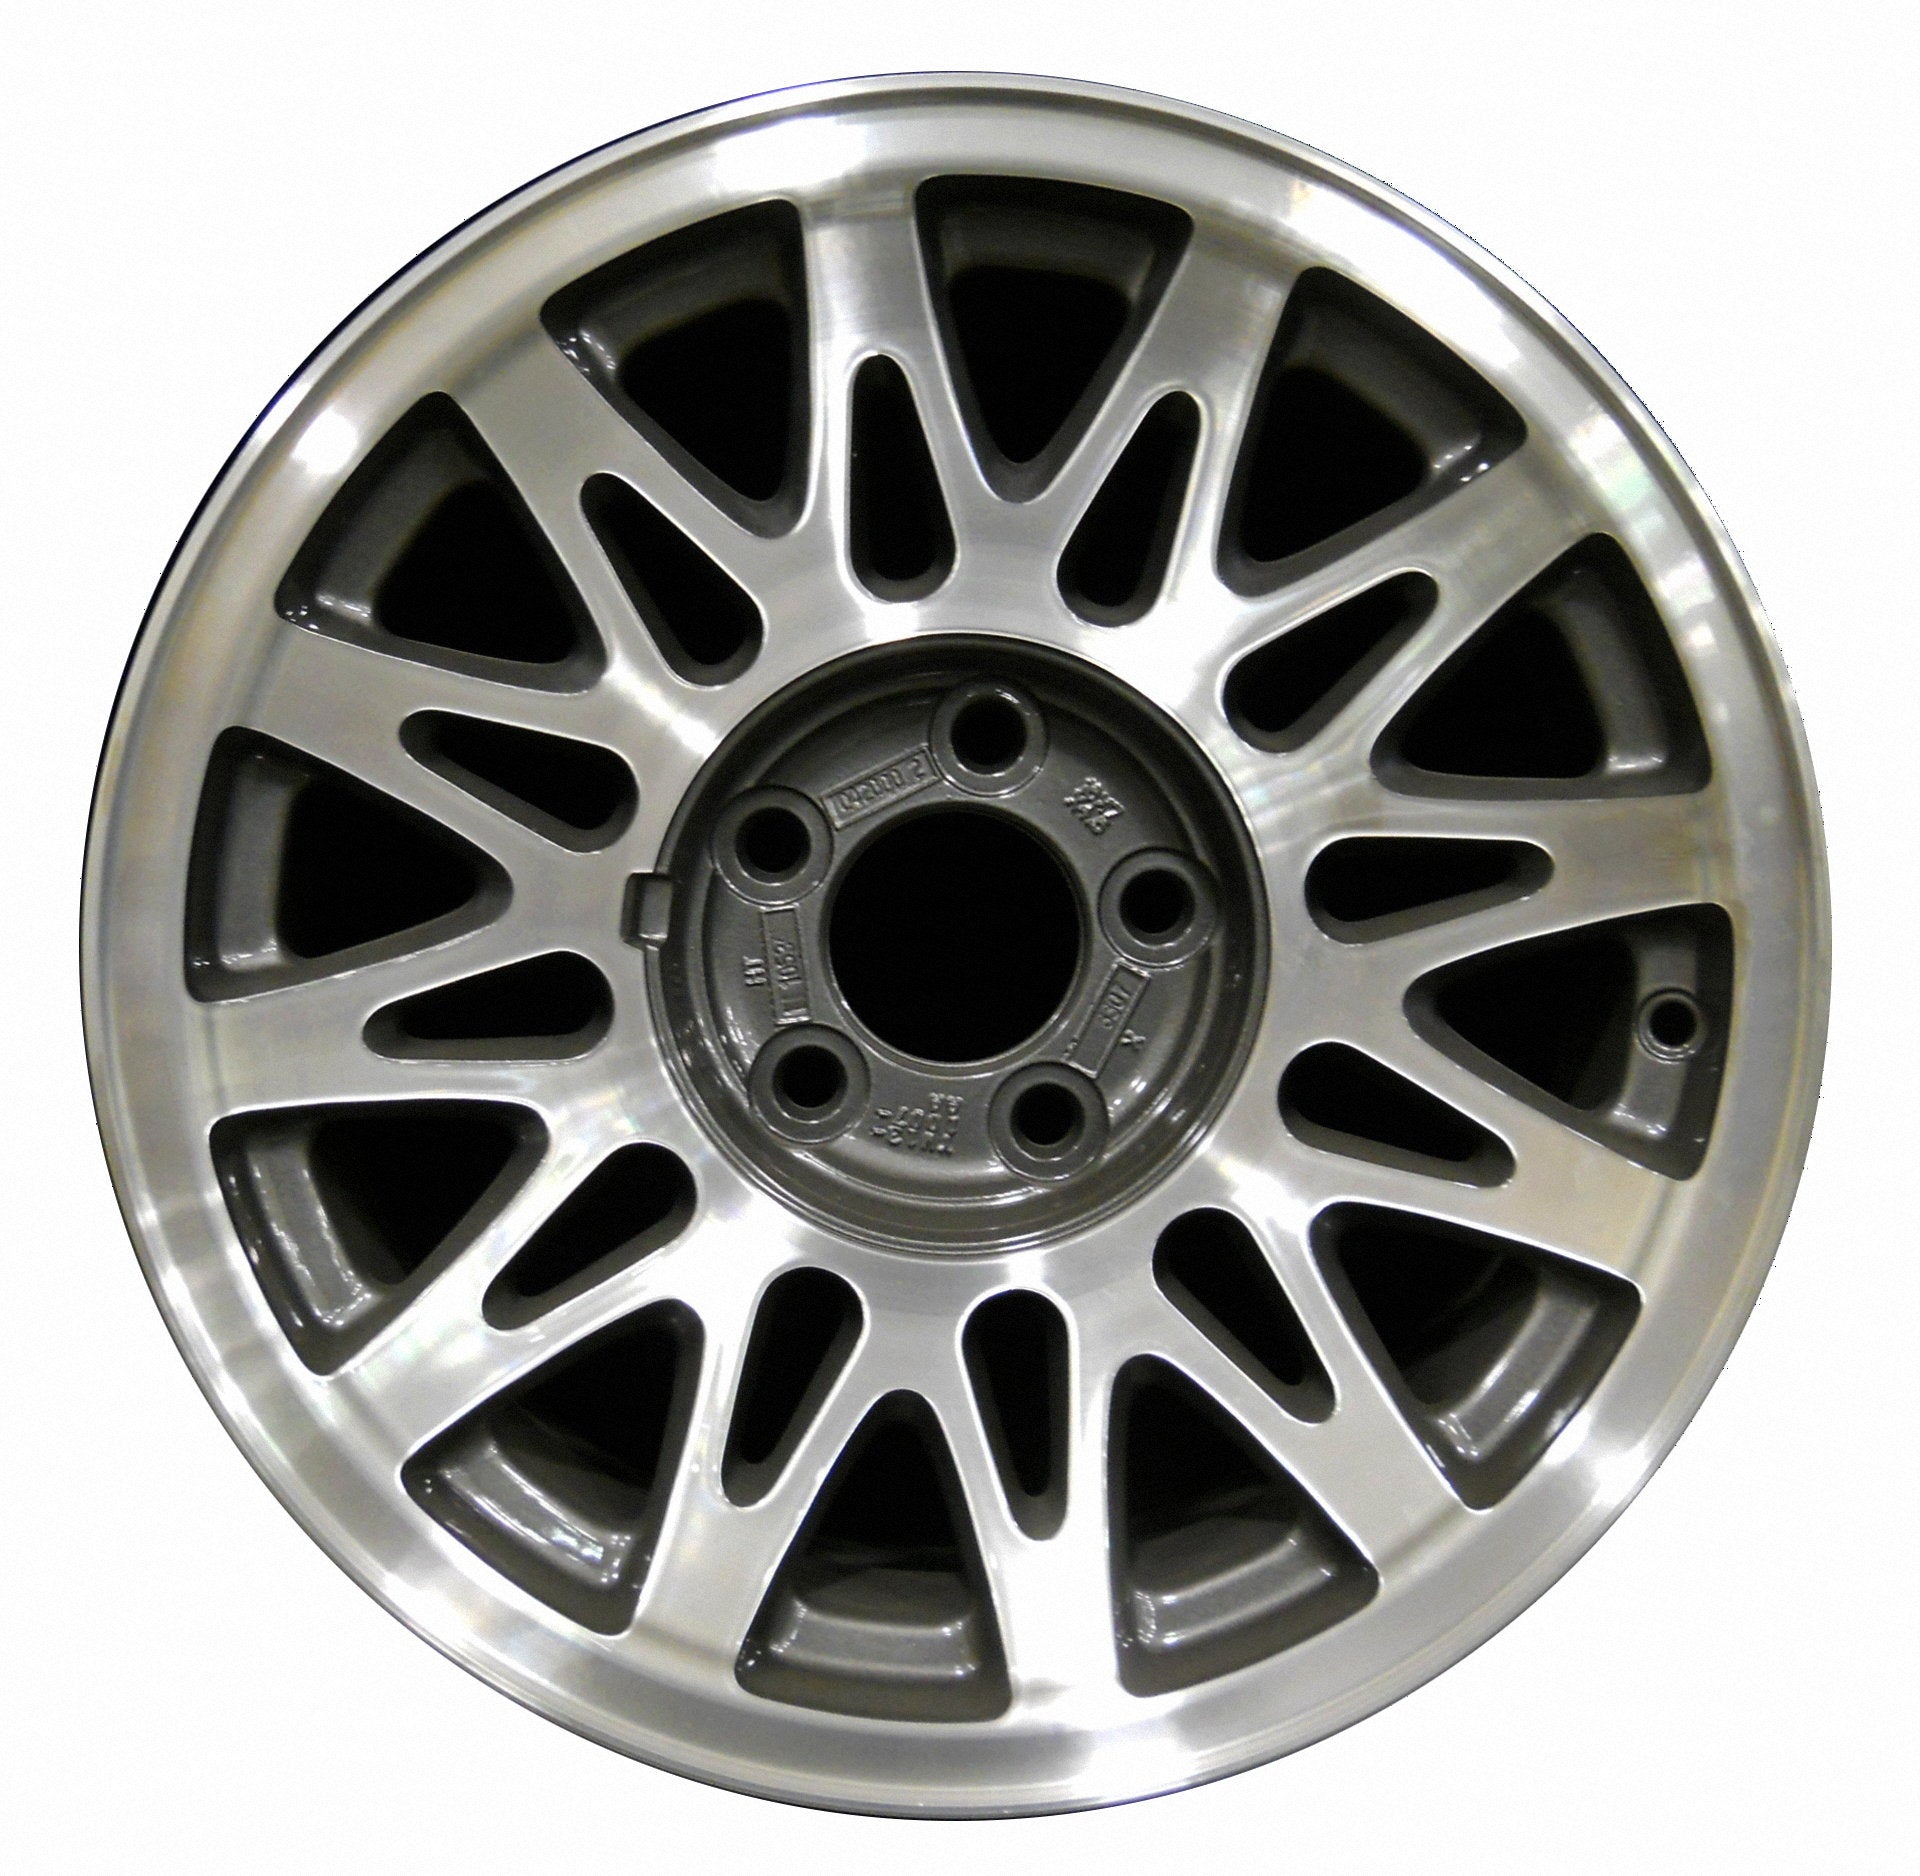 Lincoln Town Car  1998, 1999, 2000, 2001, 2002 Factory OEM Car Wheel Size 16x7 Alloy WAO.3364.PC05.MA